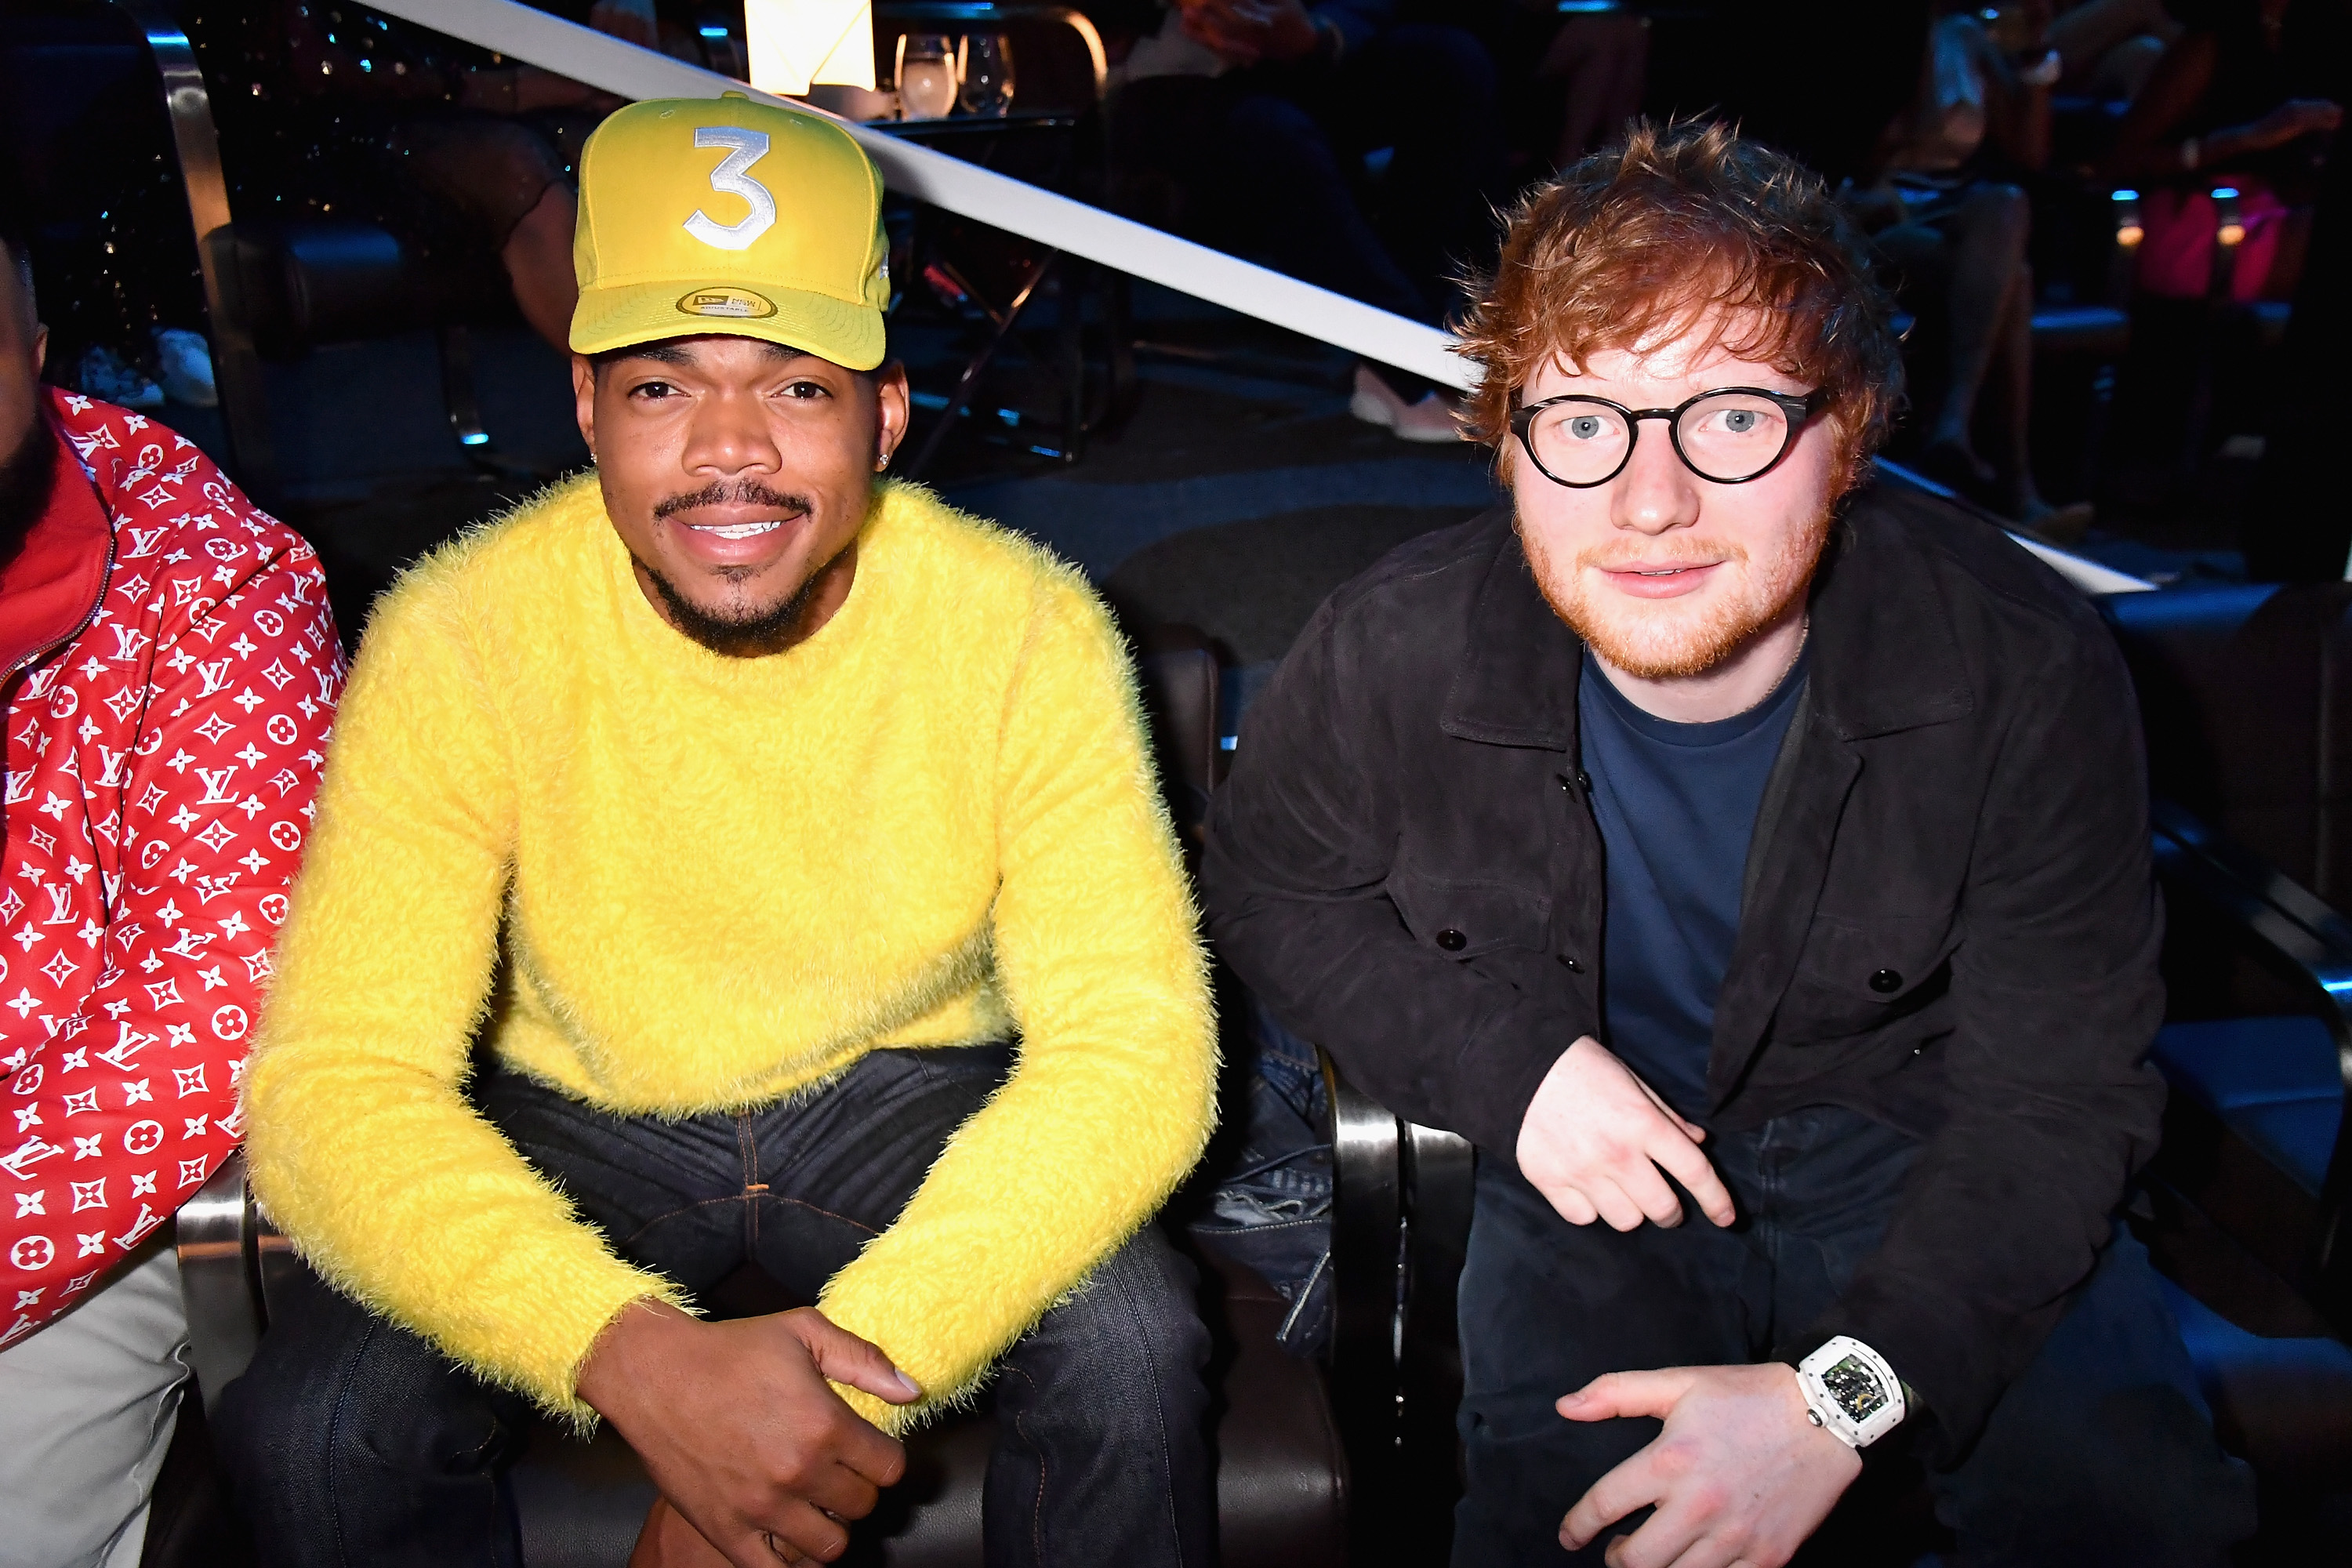 Ed Sheeran's 'Cross Me' Video With Chance the Rapper & PnB Rock: Watch